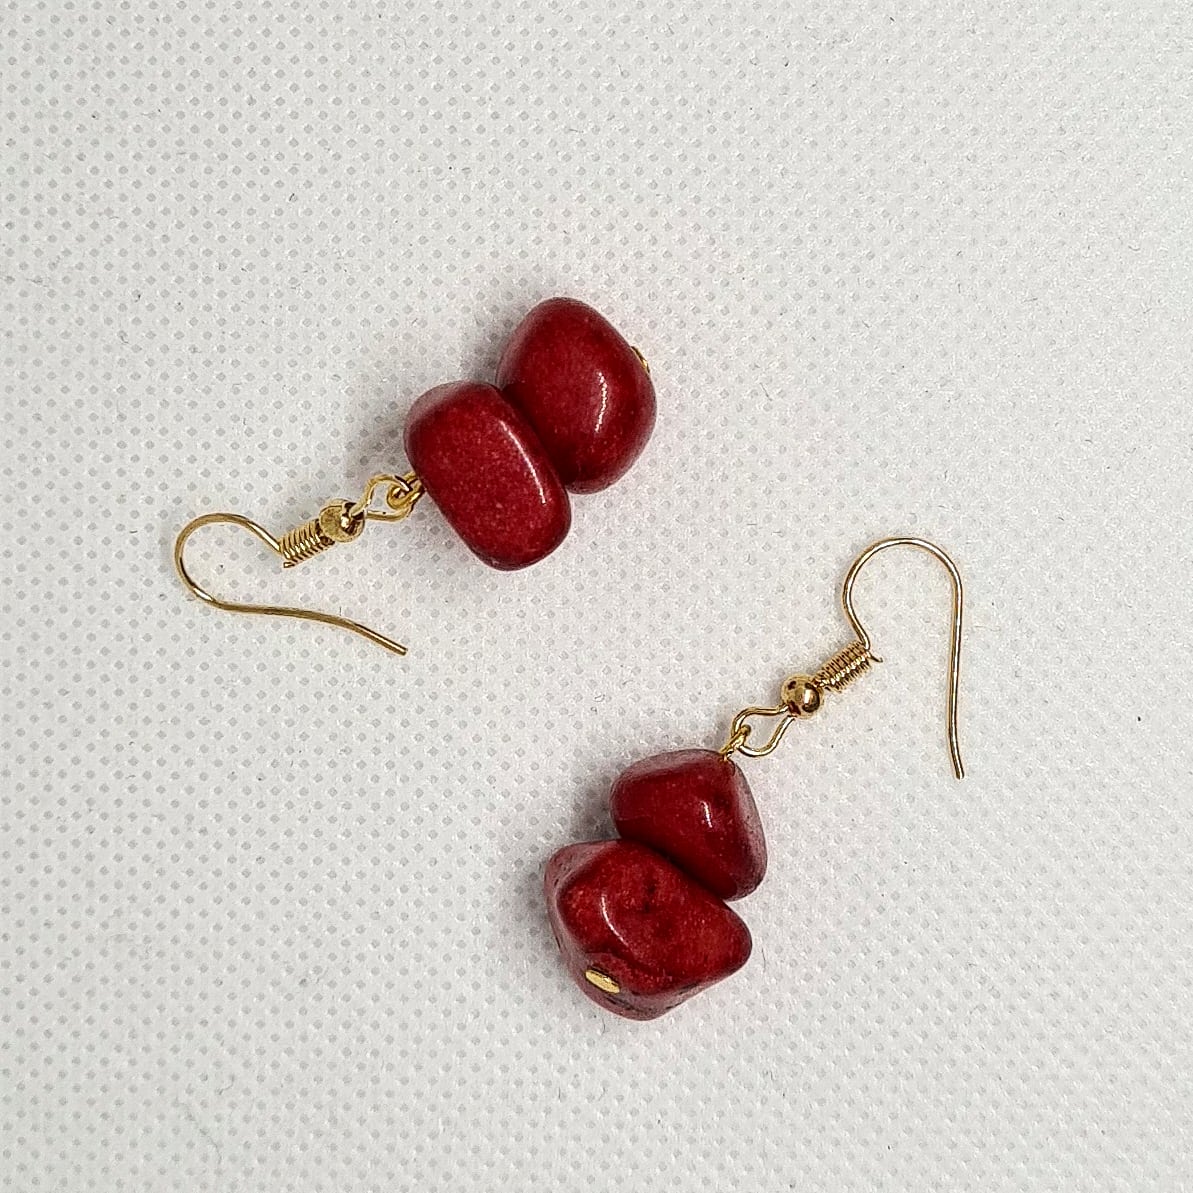 Pair of red earrings sitting on a white surface. The earrings are made of red metal and have gold hooks. They are a simple and elegant design that would be perfect for any occasion. The earrings are sitting on a white surface, which provides a nice contrast to the red color of the earrings.